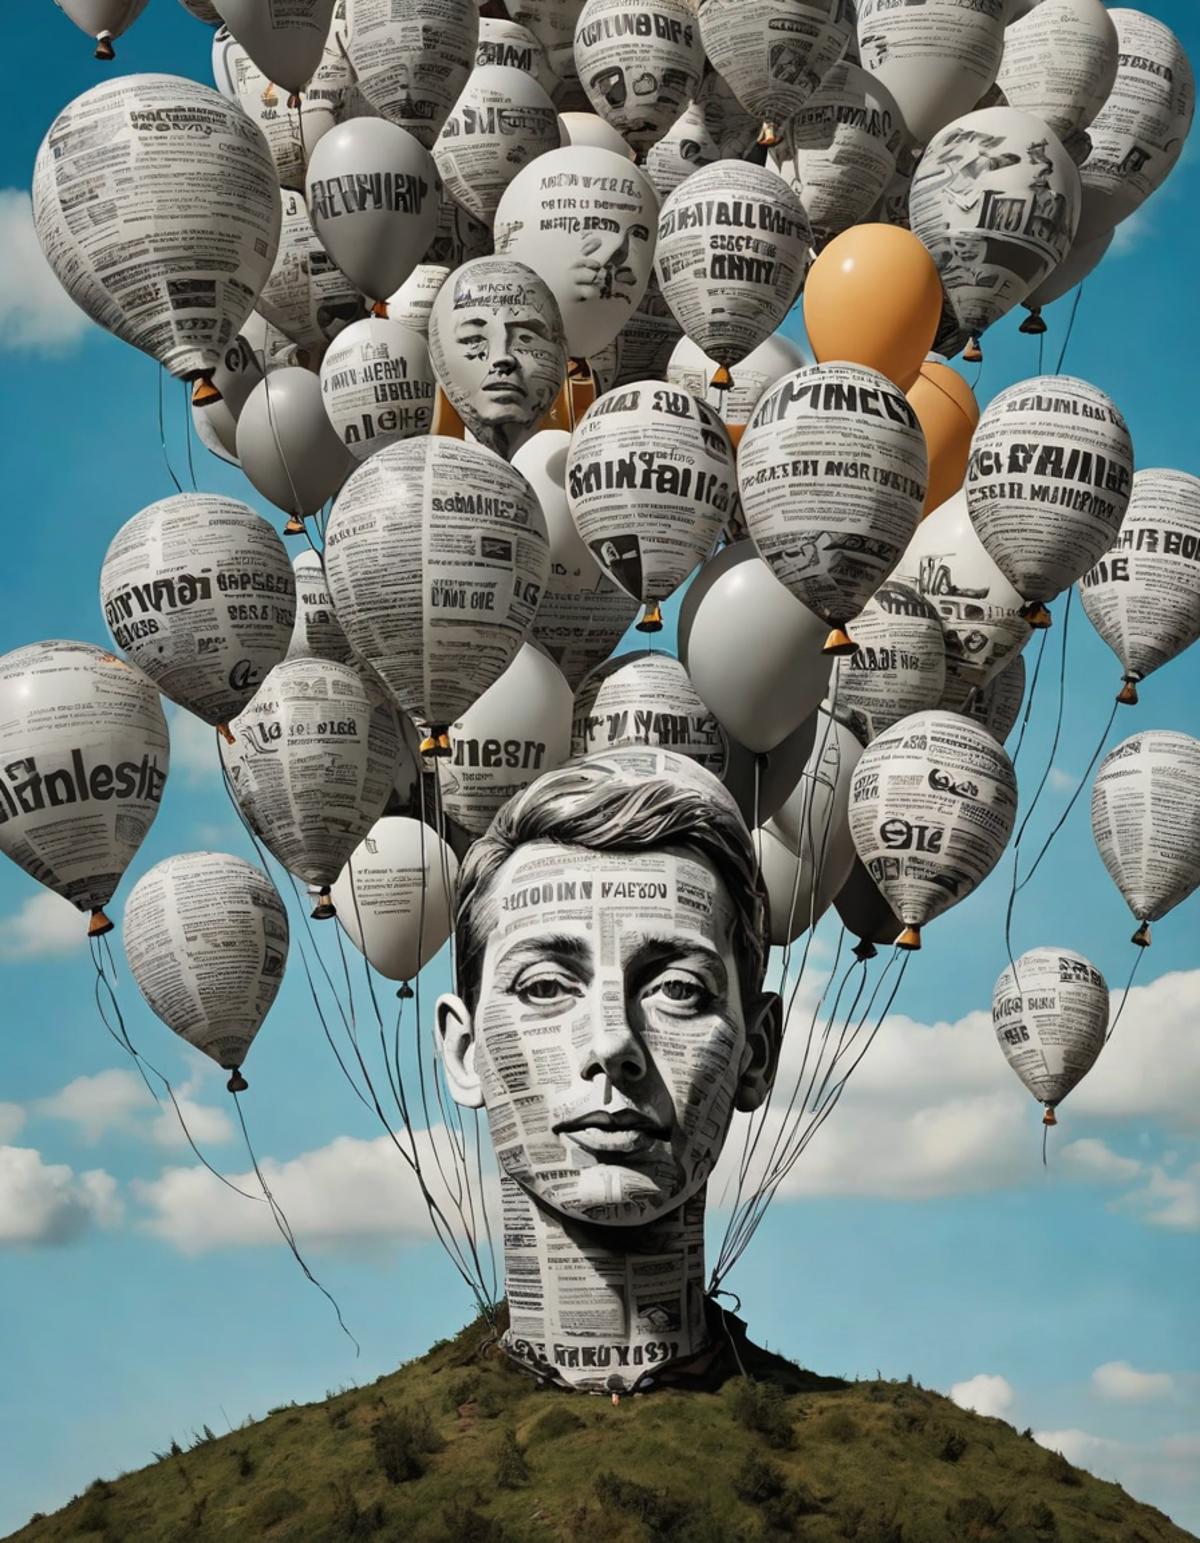 A portrait made of balloons of a young man with a newspaper background.